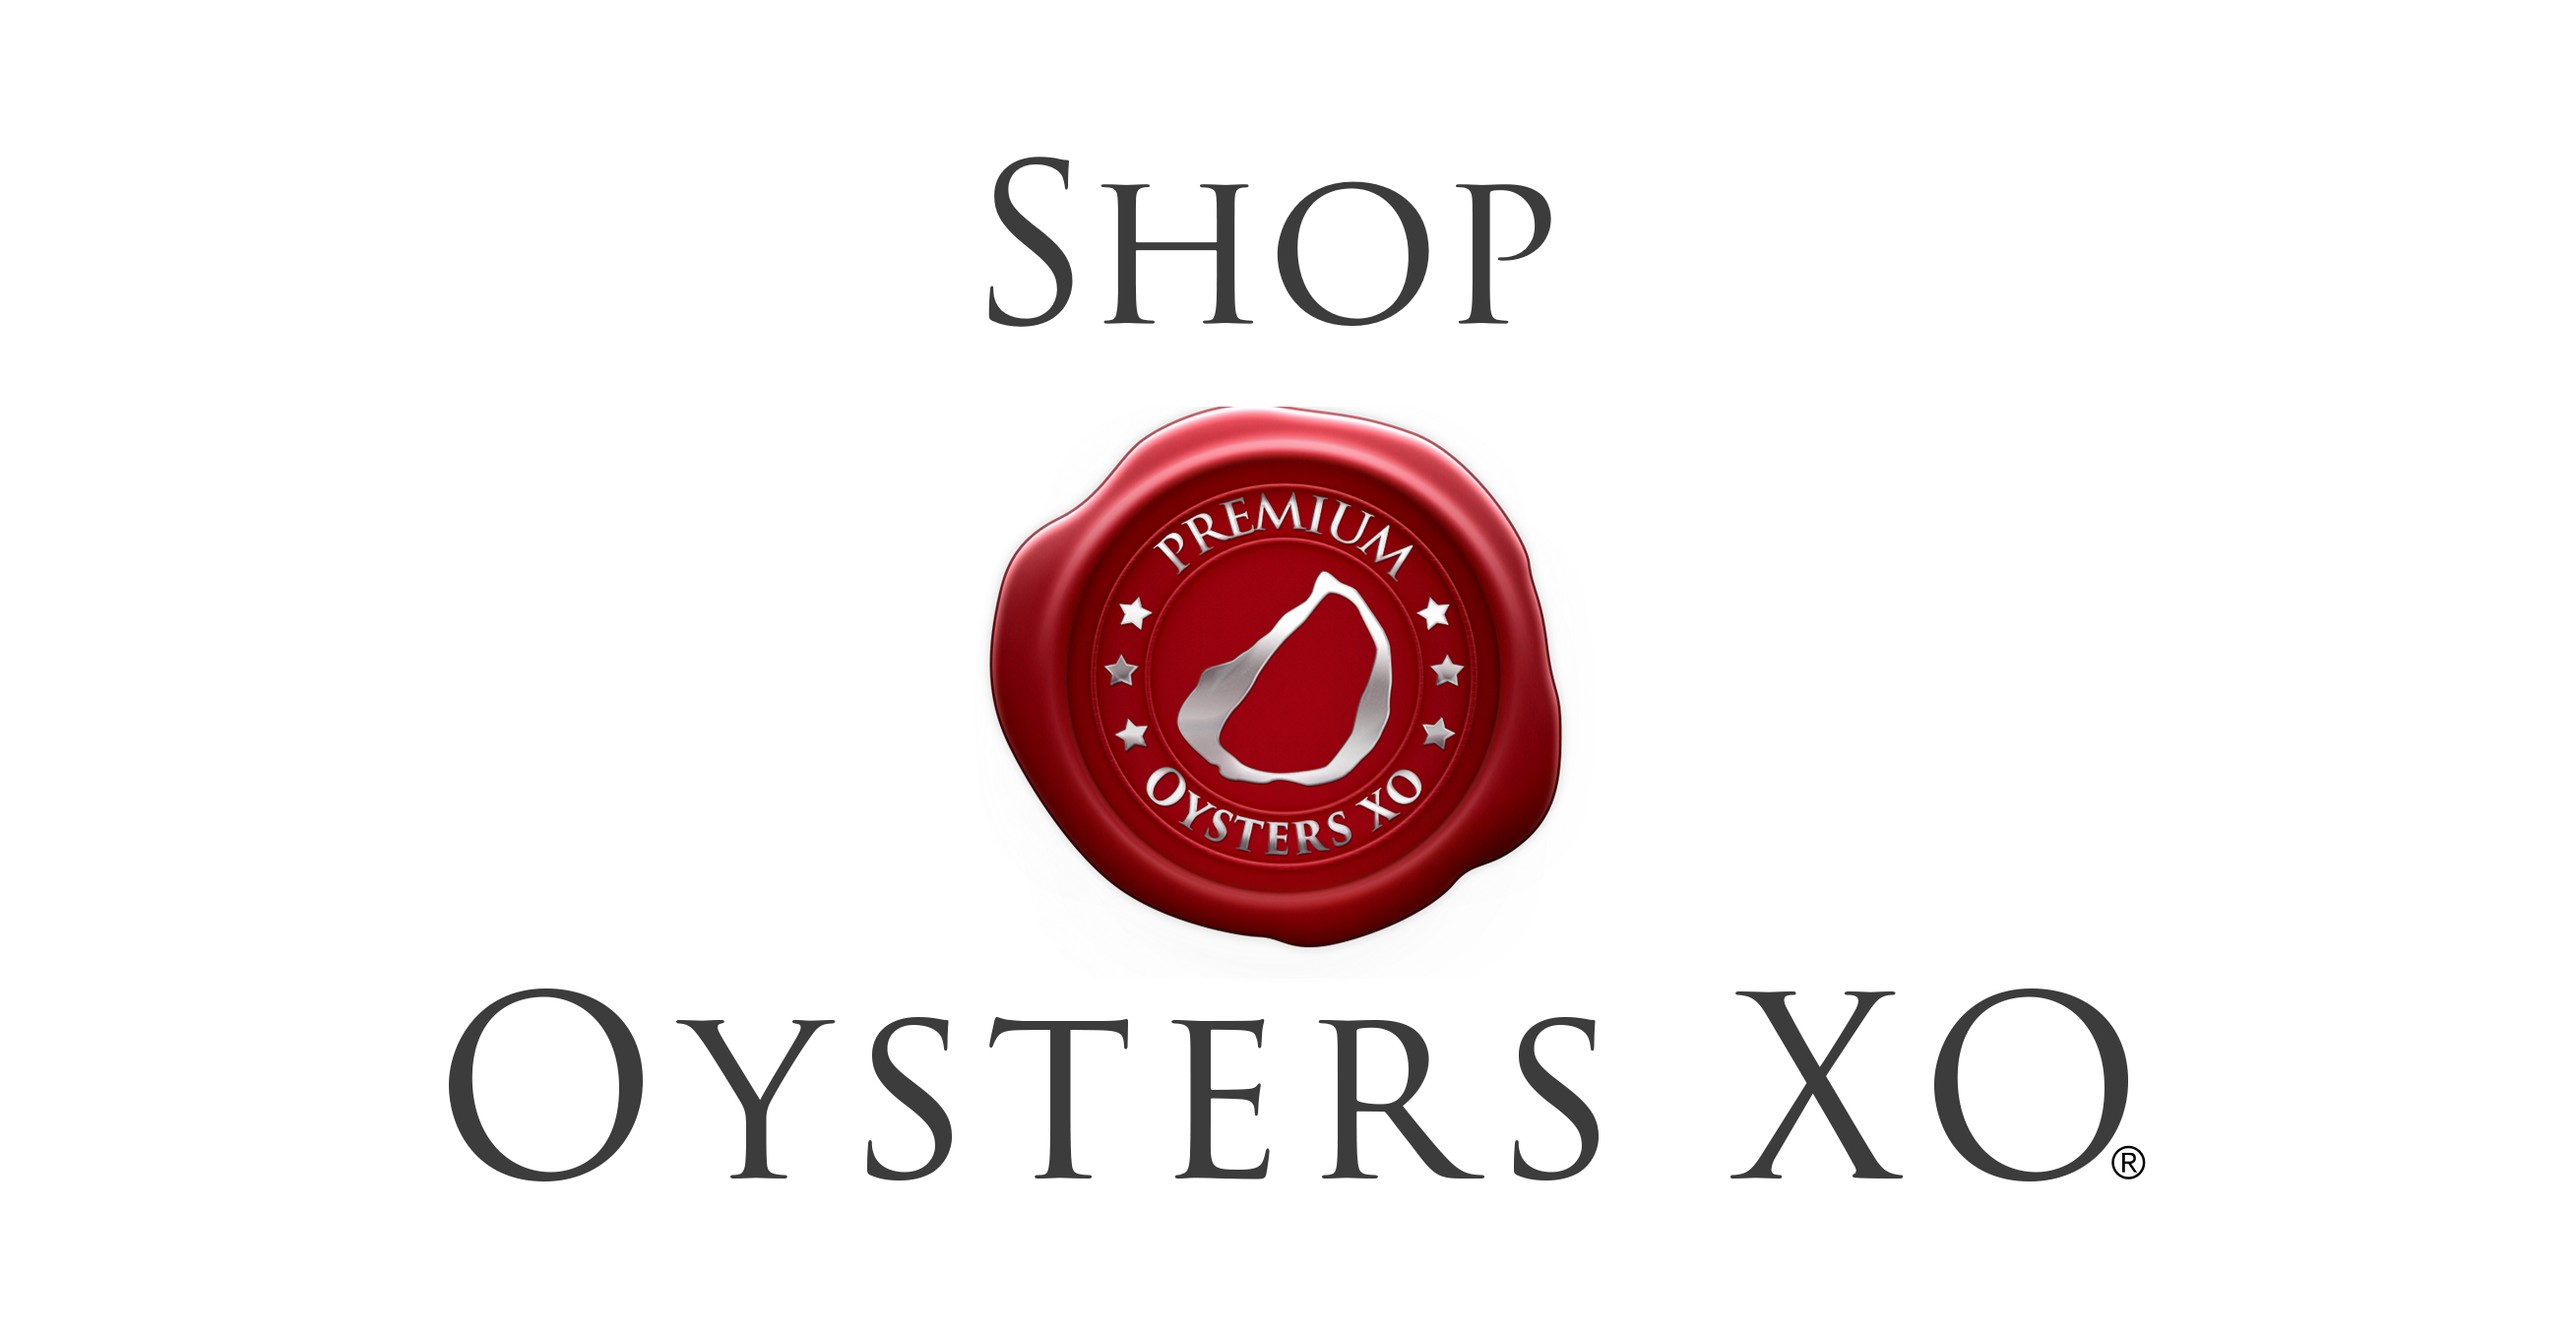 SHOP OYSTERS – Vertical transparent for White background